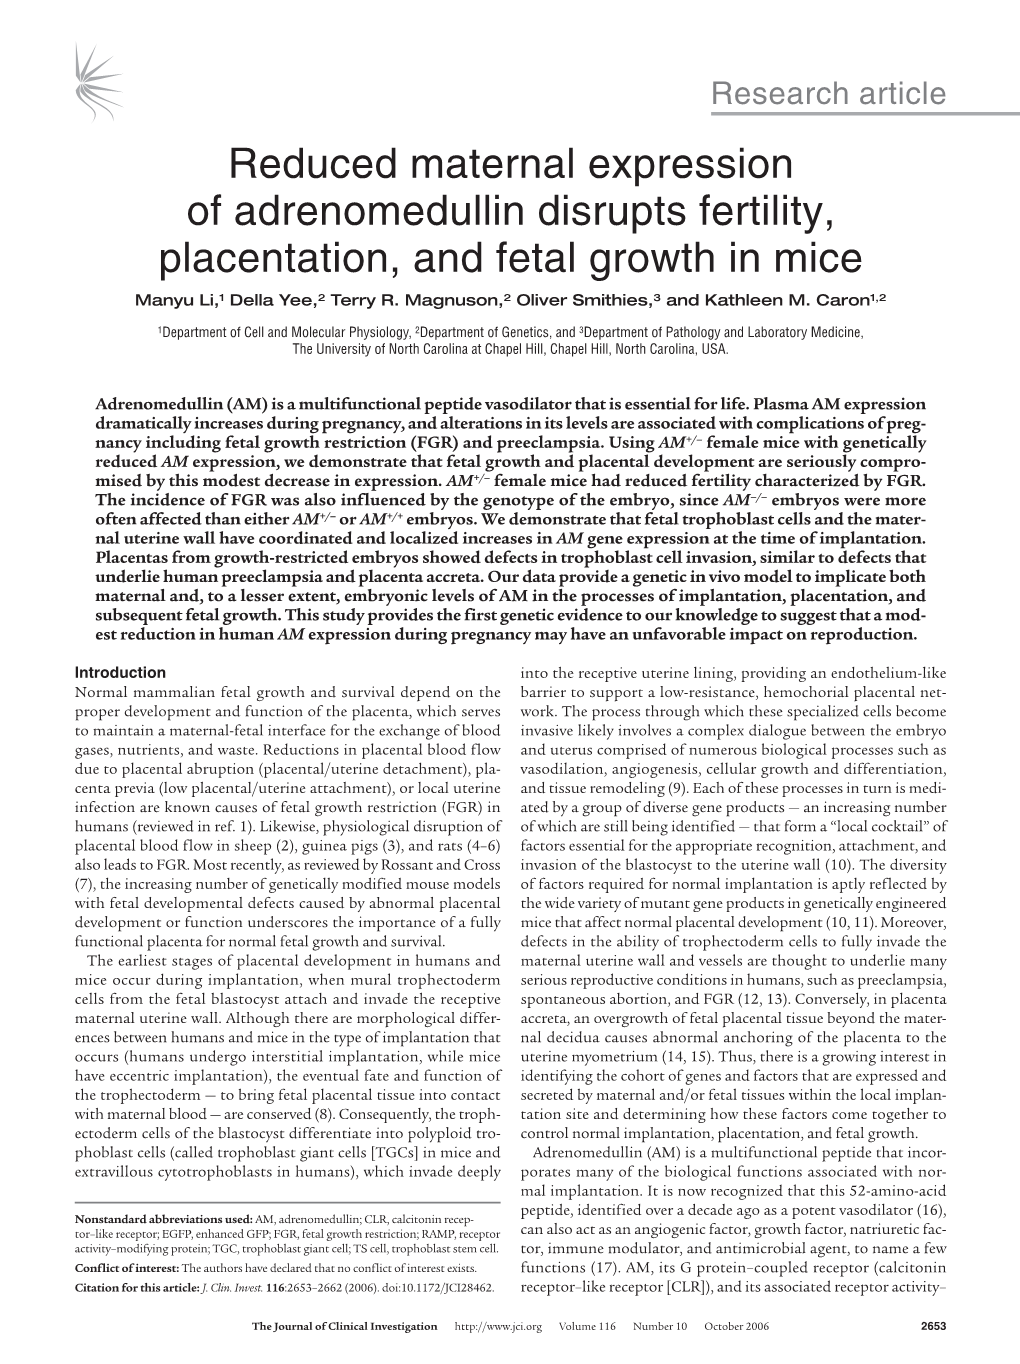 Reduced Maternal Expression of Adrenomedullin Disrupts Fertility, Placentation, and Fetal Growth in Mice Manyu Li,1 Della Yee,2 Terry R